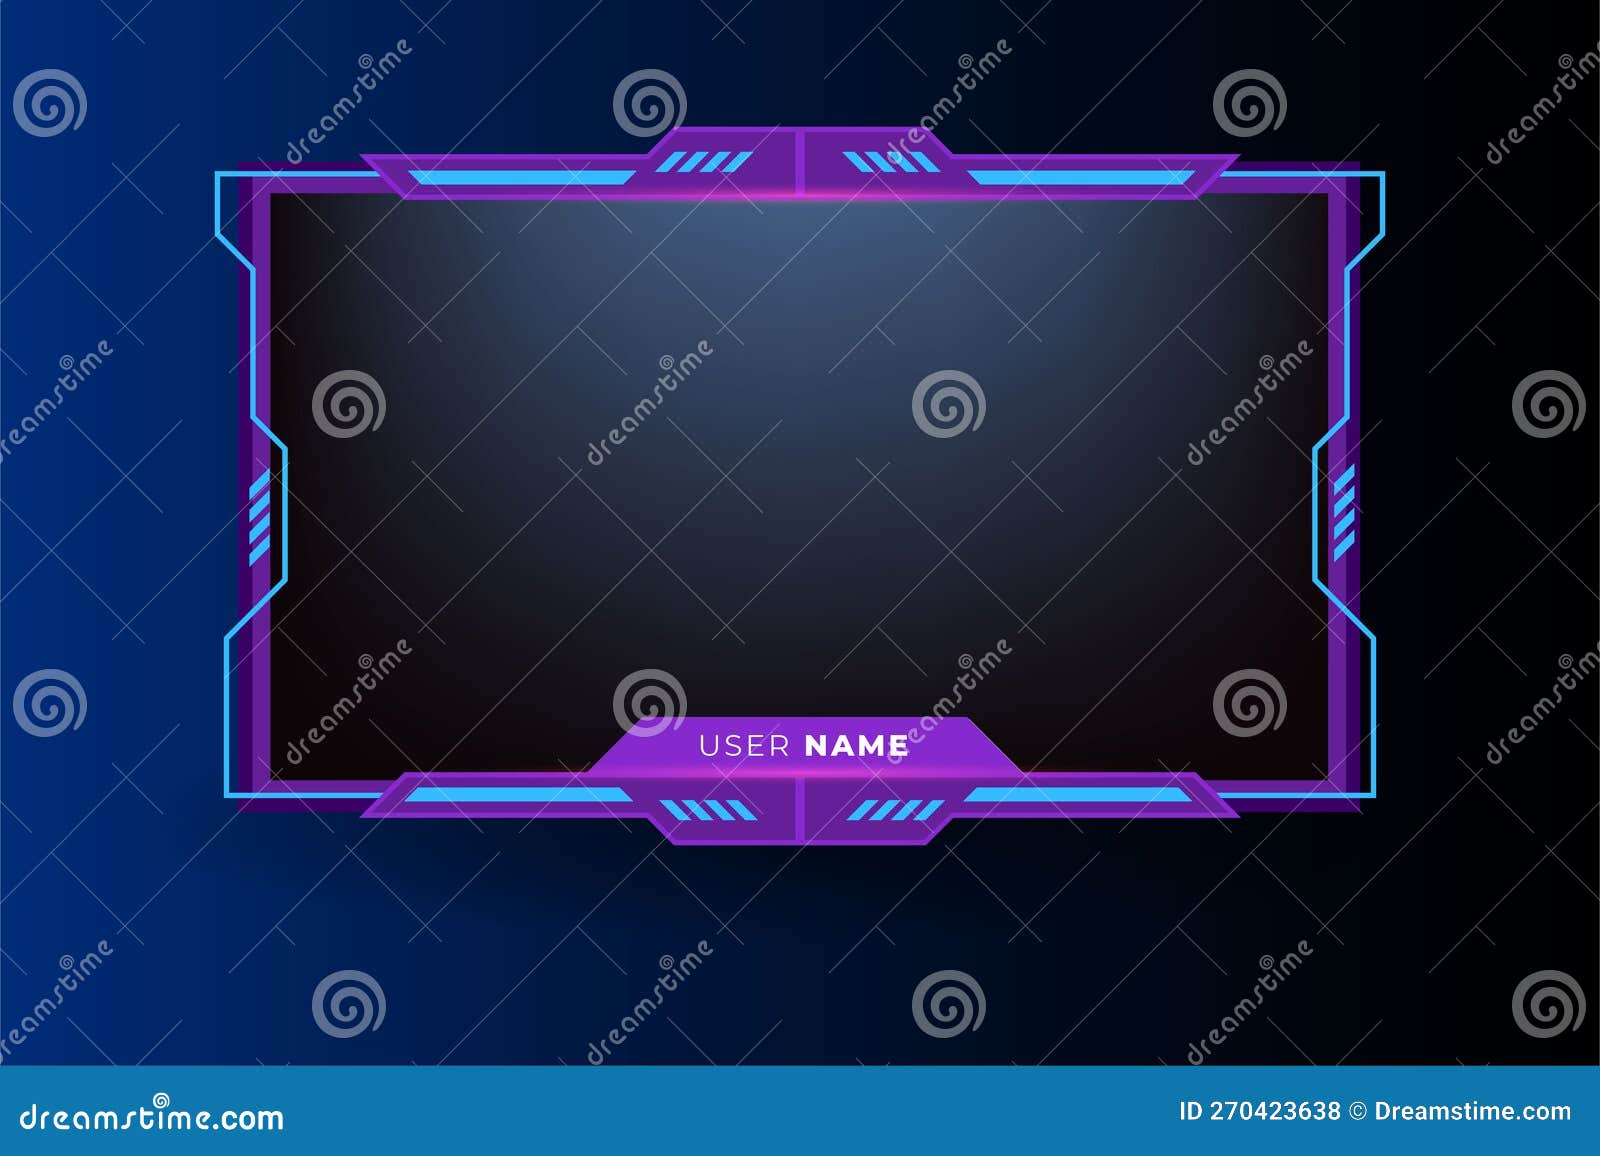 Online Game Streaming Overlay Vector for Live Gamers